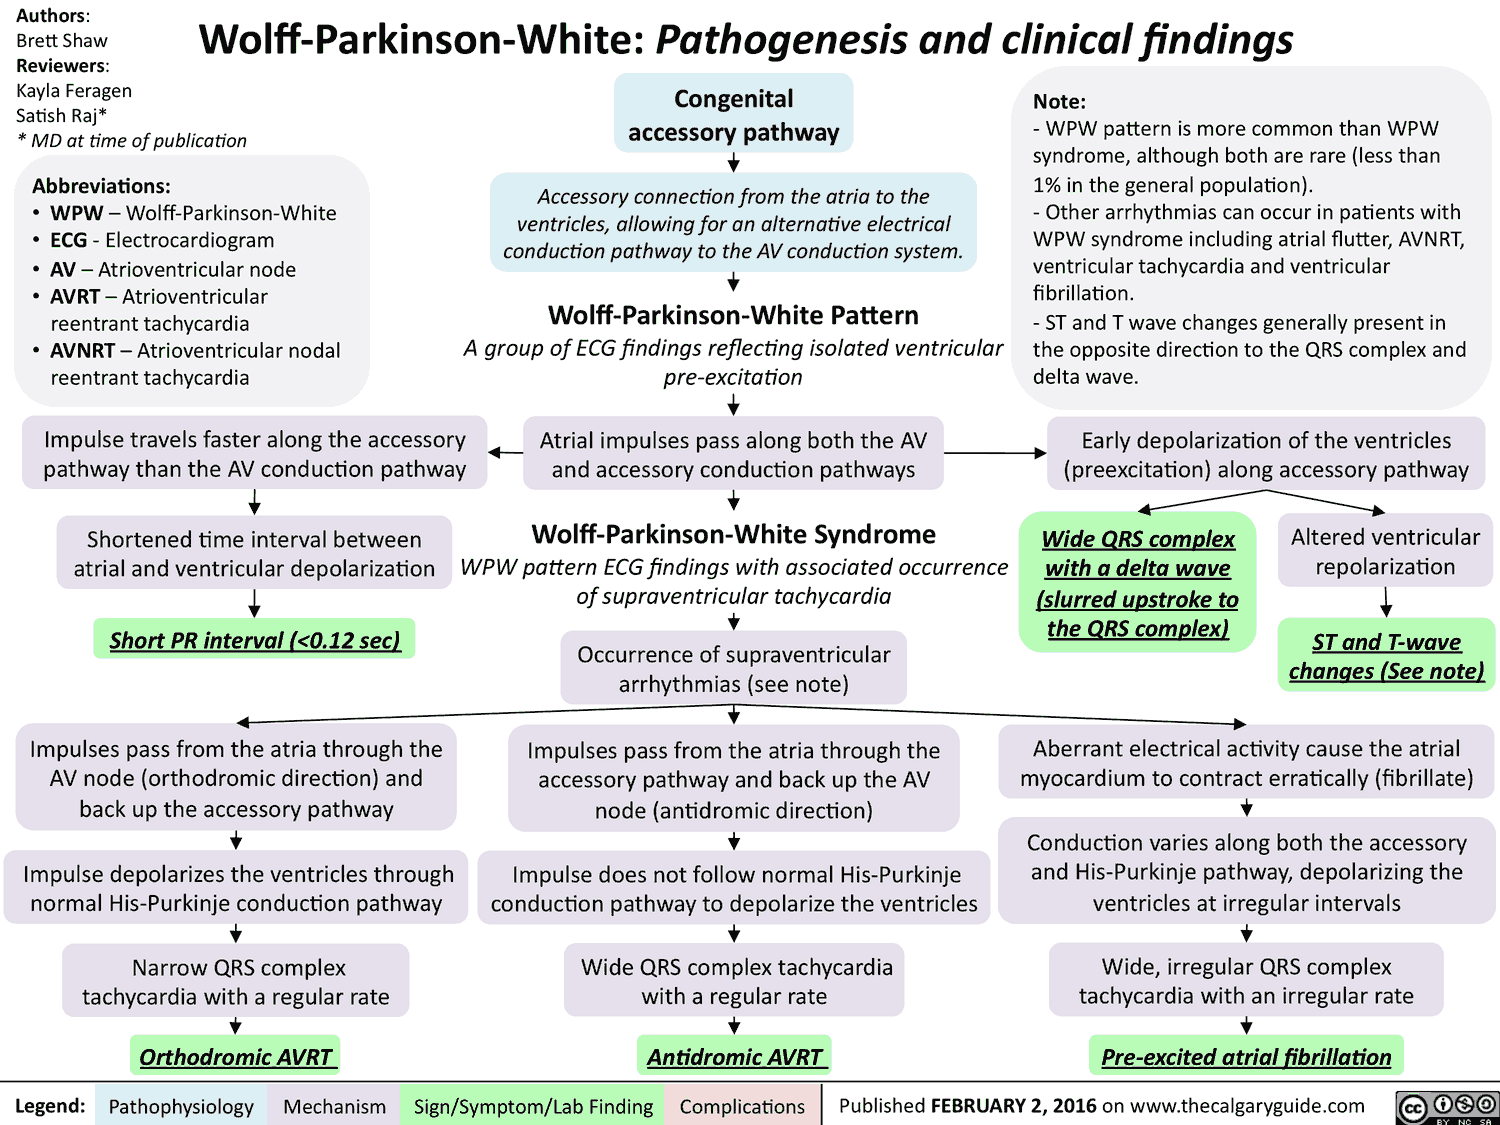 Wolff-Parkinson-White - Pathogenesis and clinical findings